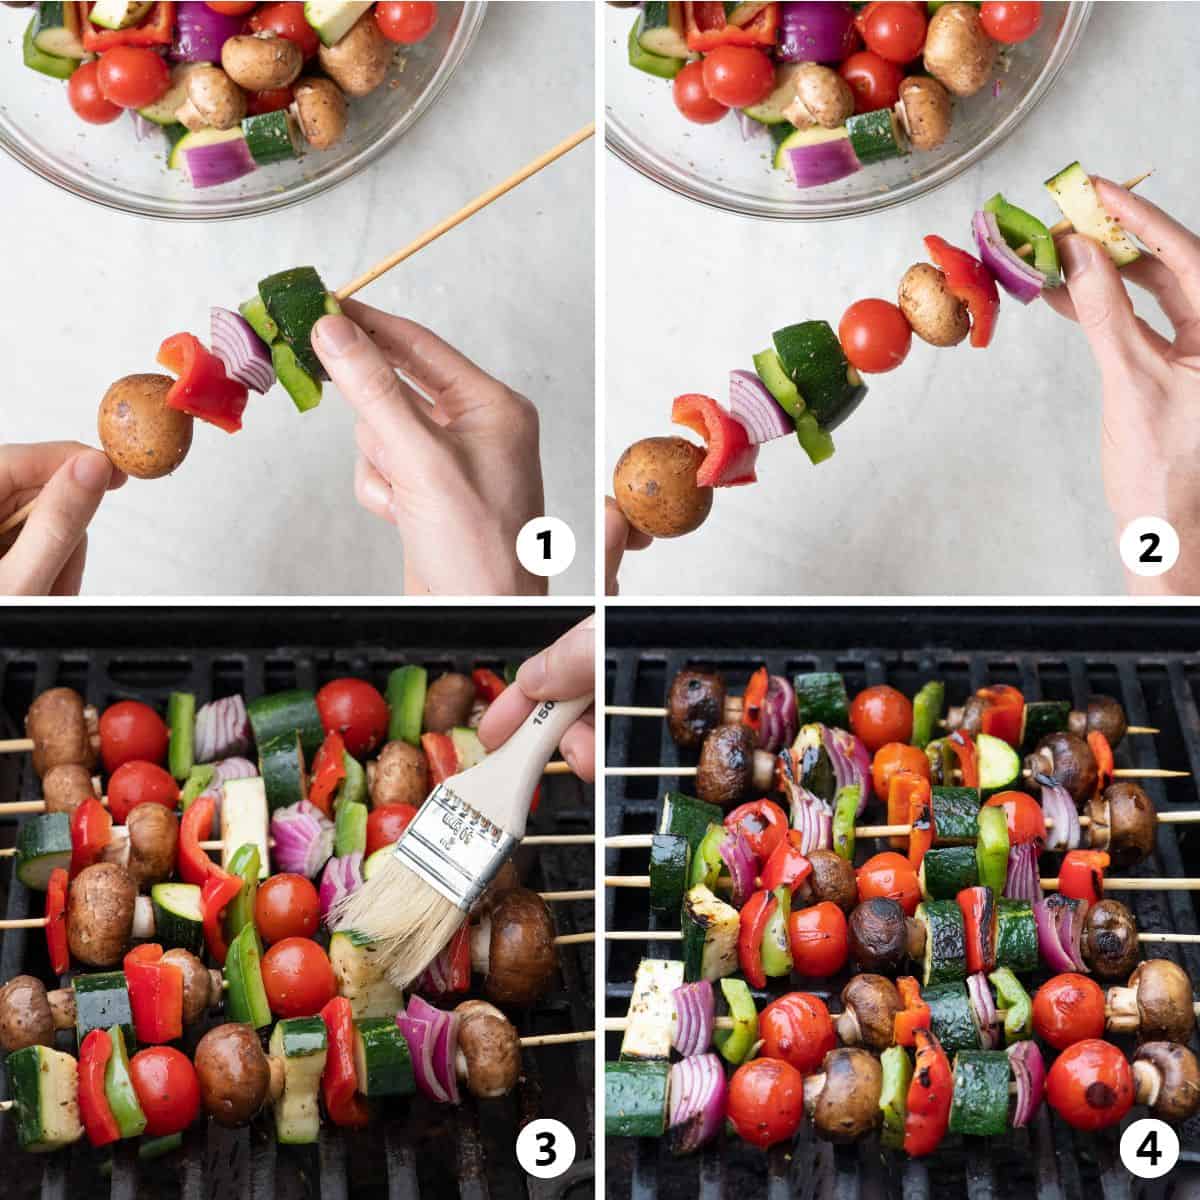 4 image collage prepping and cooking recipe: 1- adding veggies to a wooden skewer, 2- adding the last vegetable to it, 3- skewers on a grill brushing extra oil mixture on them, 4- after flipping to show grill marks.